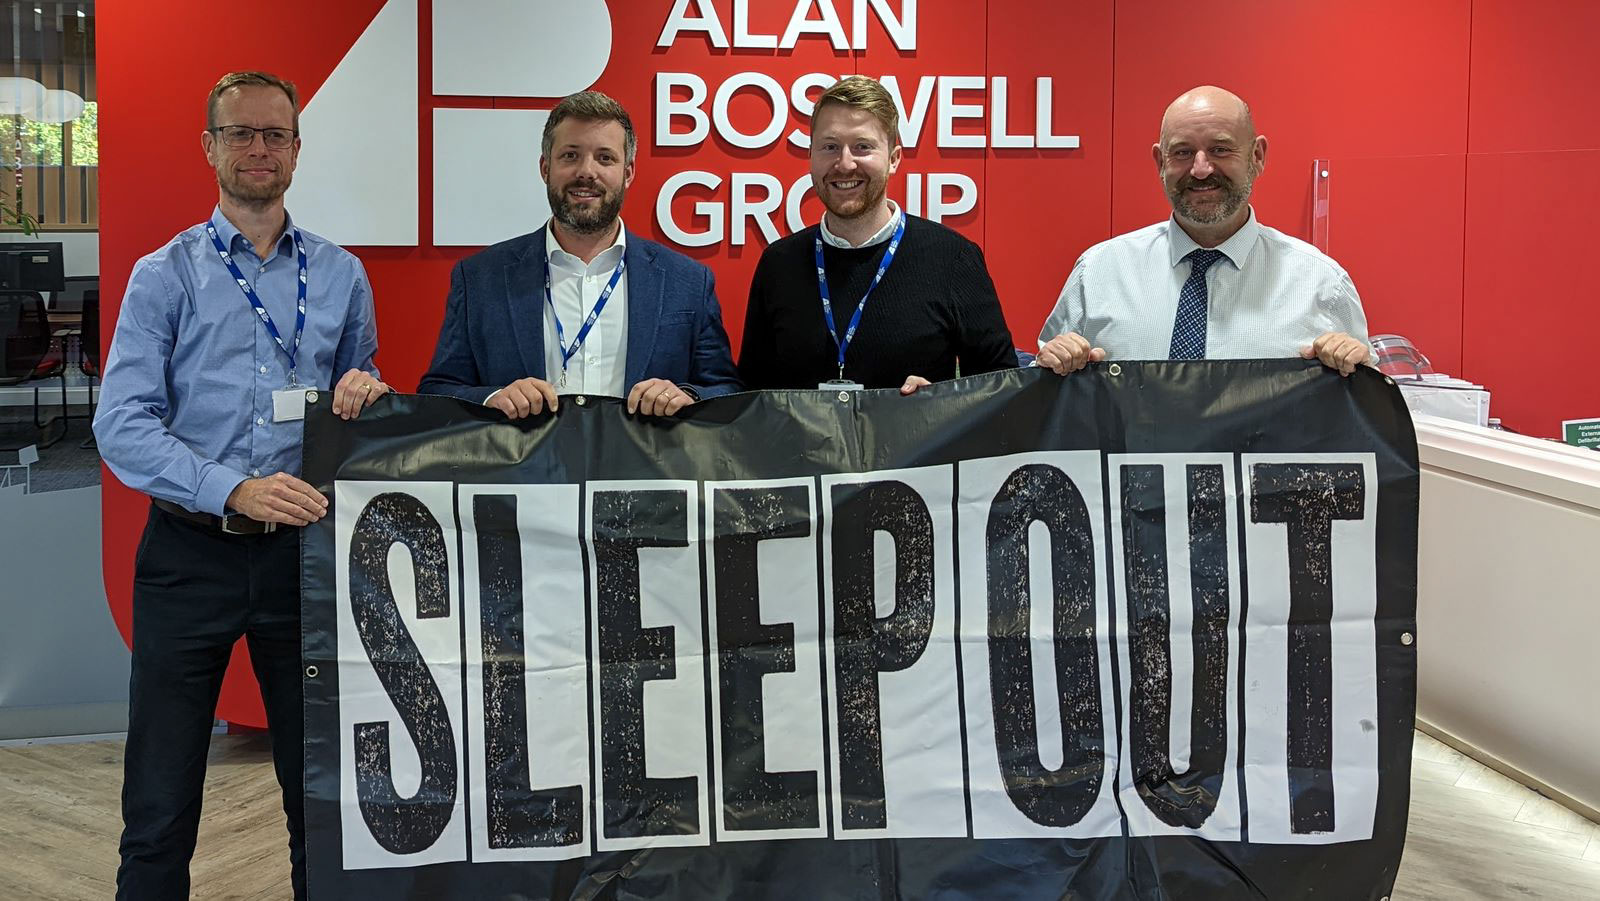 Norwich sleep out 2022